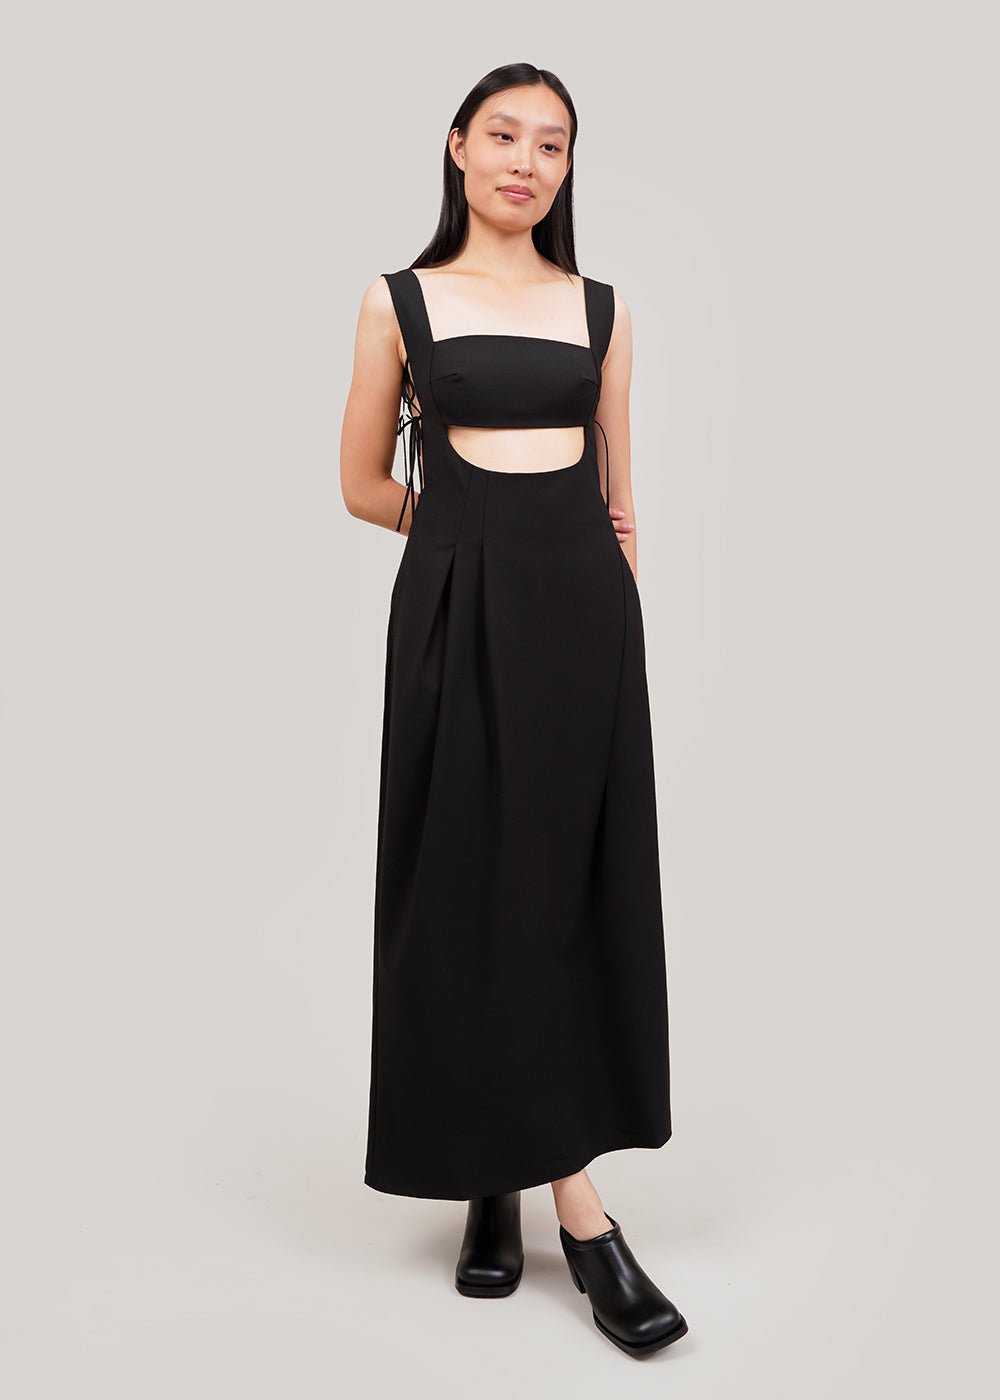 Cordera Tailored Cut-Out Dress - New Classics Studios Sustainable Ethical Fashion Canada